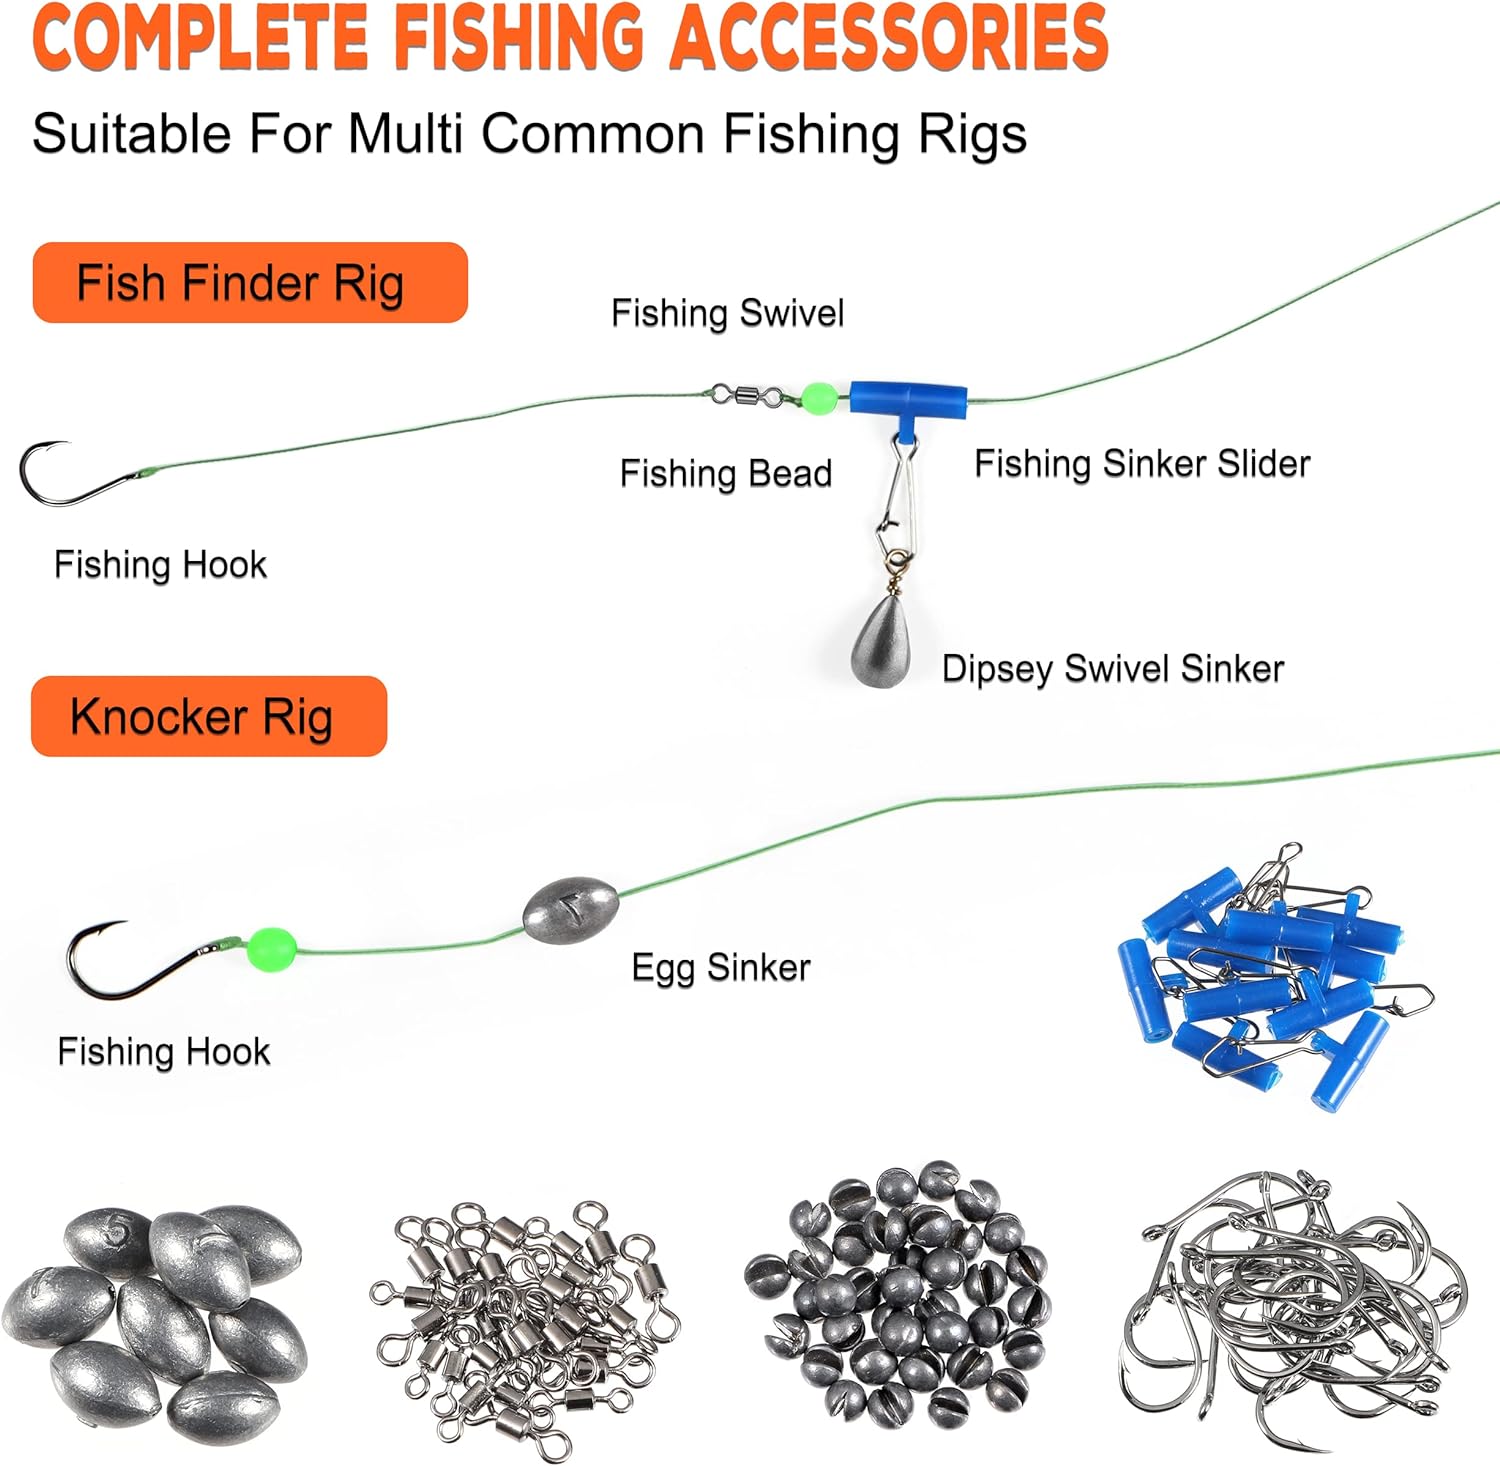 Fishing Accessories Kit, Fishing Tackle Box with Tackle Included